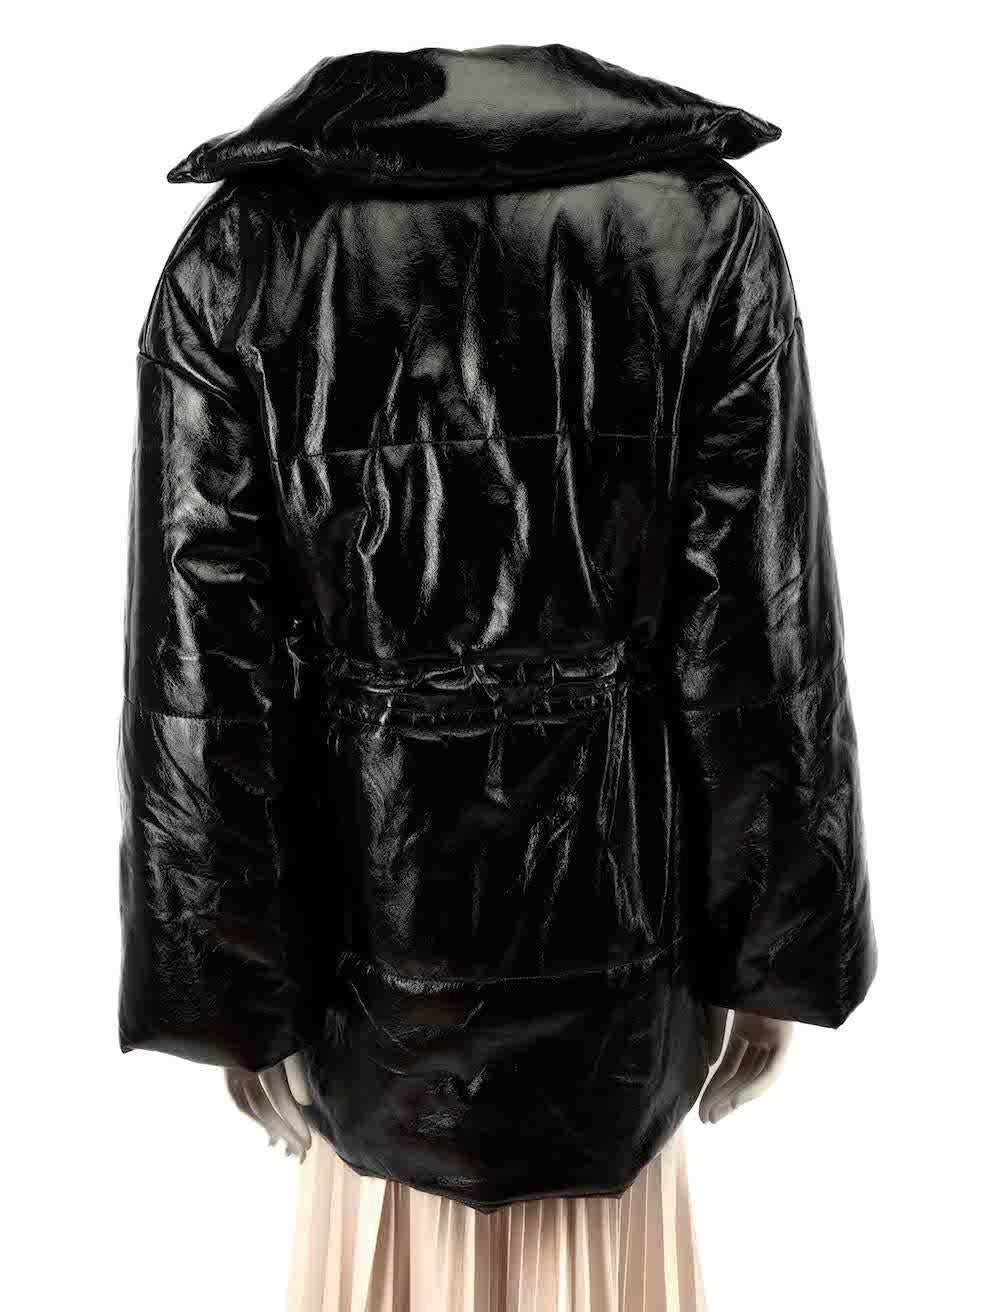 Proenza Schouler Proenza Schouler White Label Black Lacquered Puffer Coat Size S In Excellent Condition For Sale In London, GB